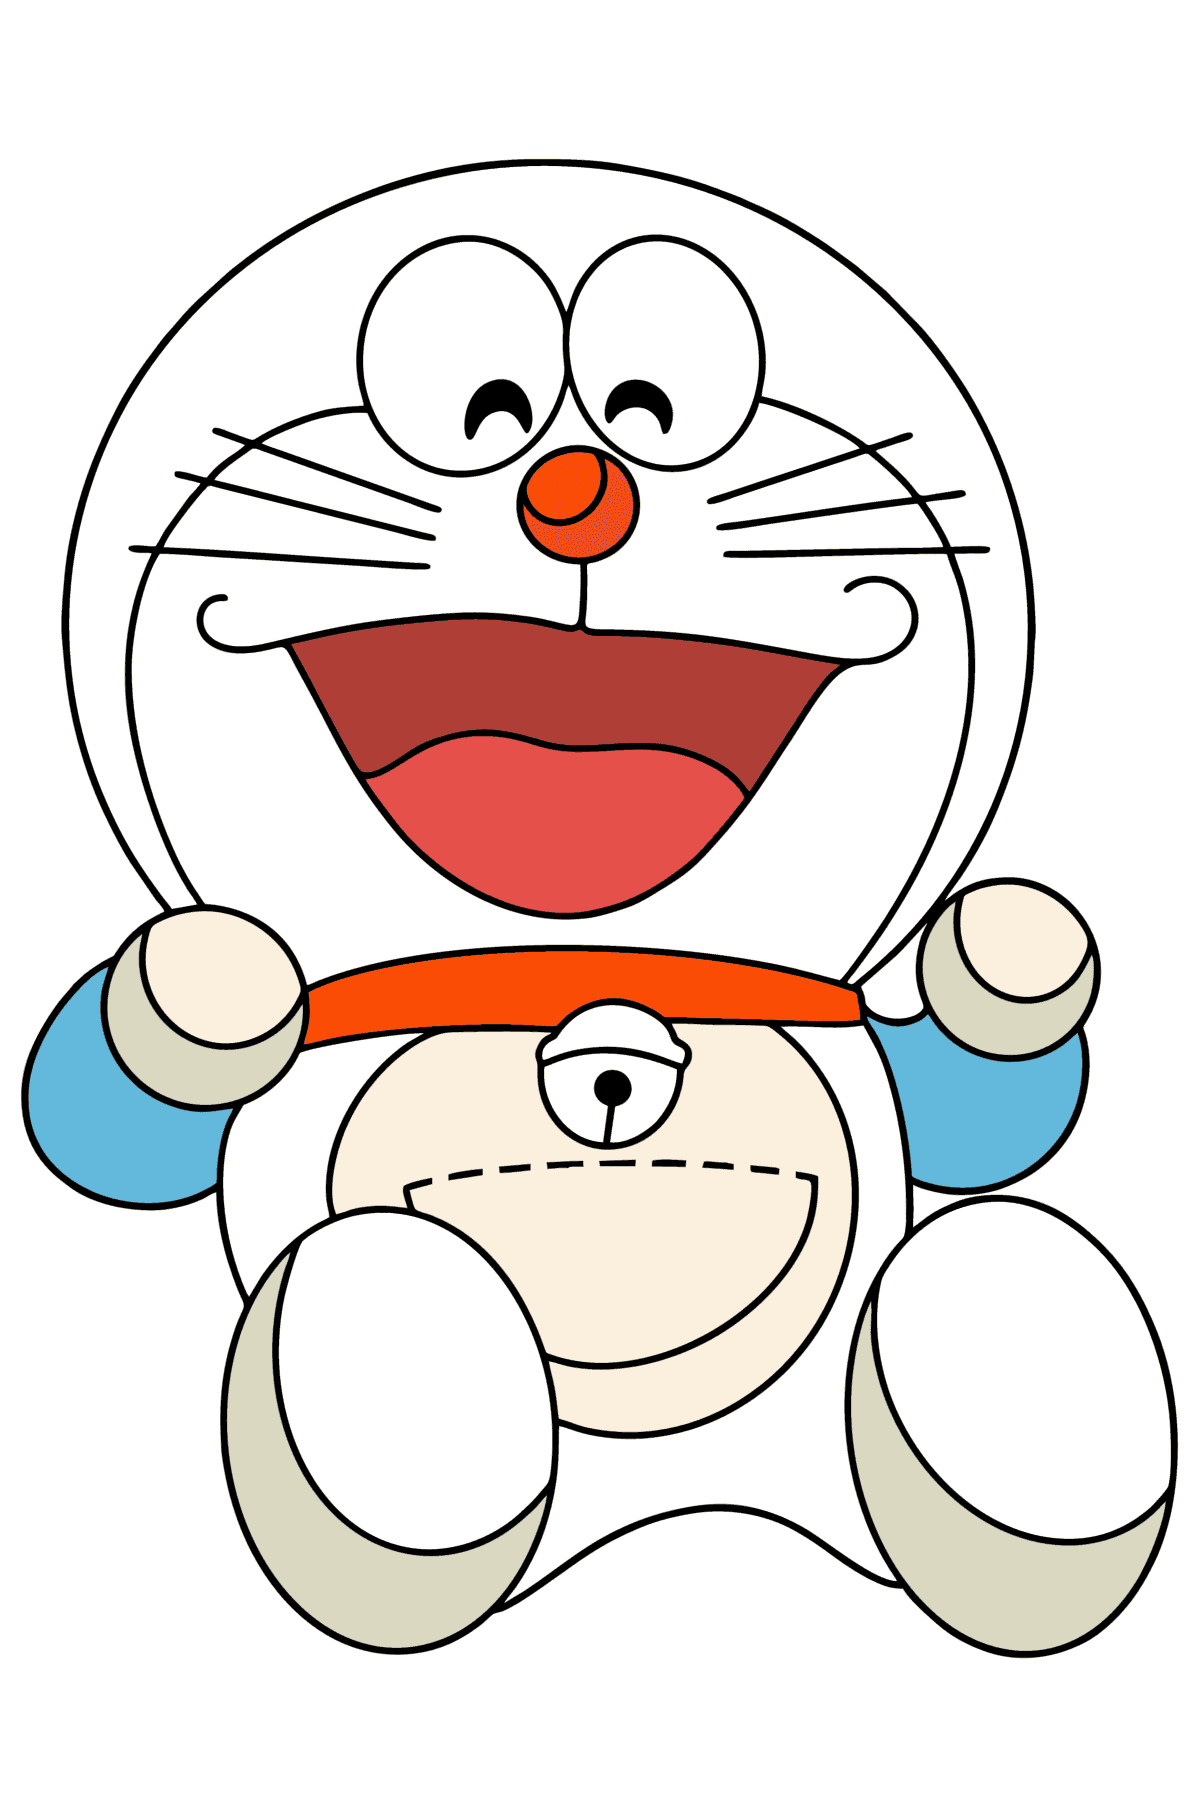 Cute Doraemon сoloring page - Coloring Pages for Kids